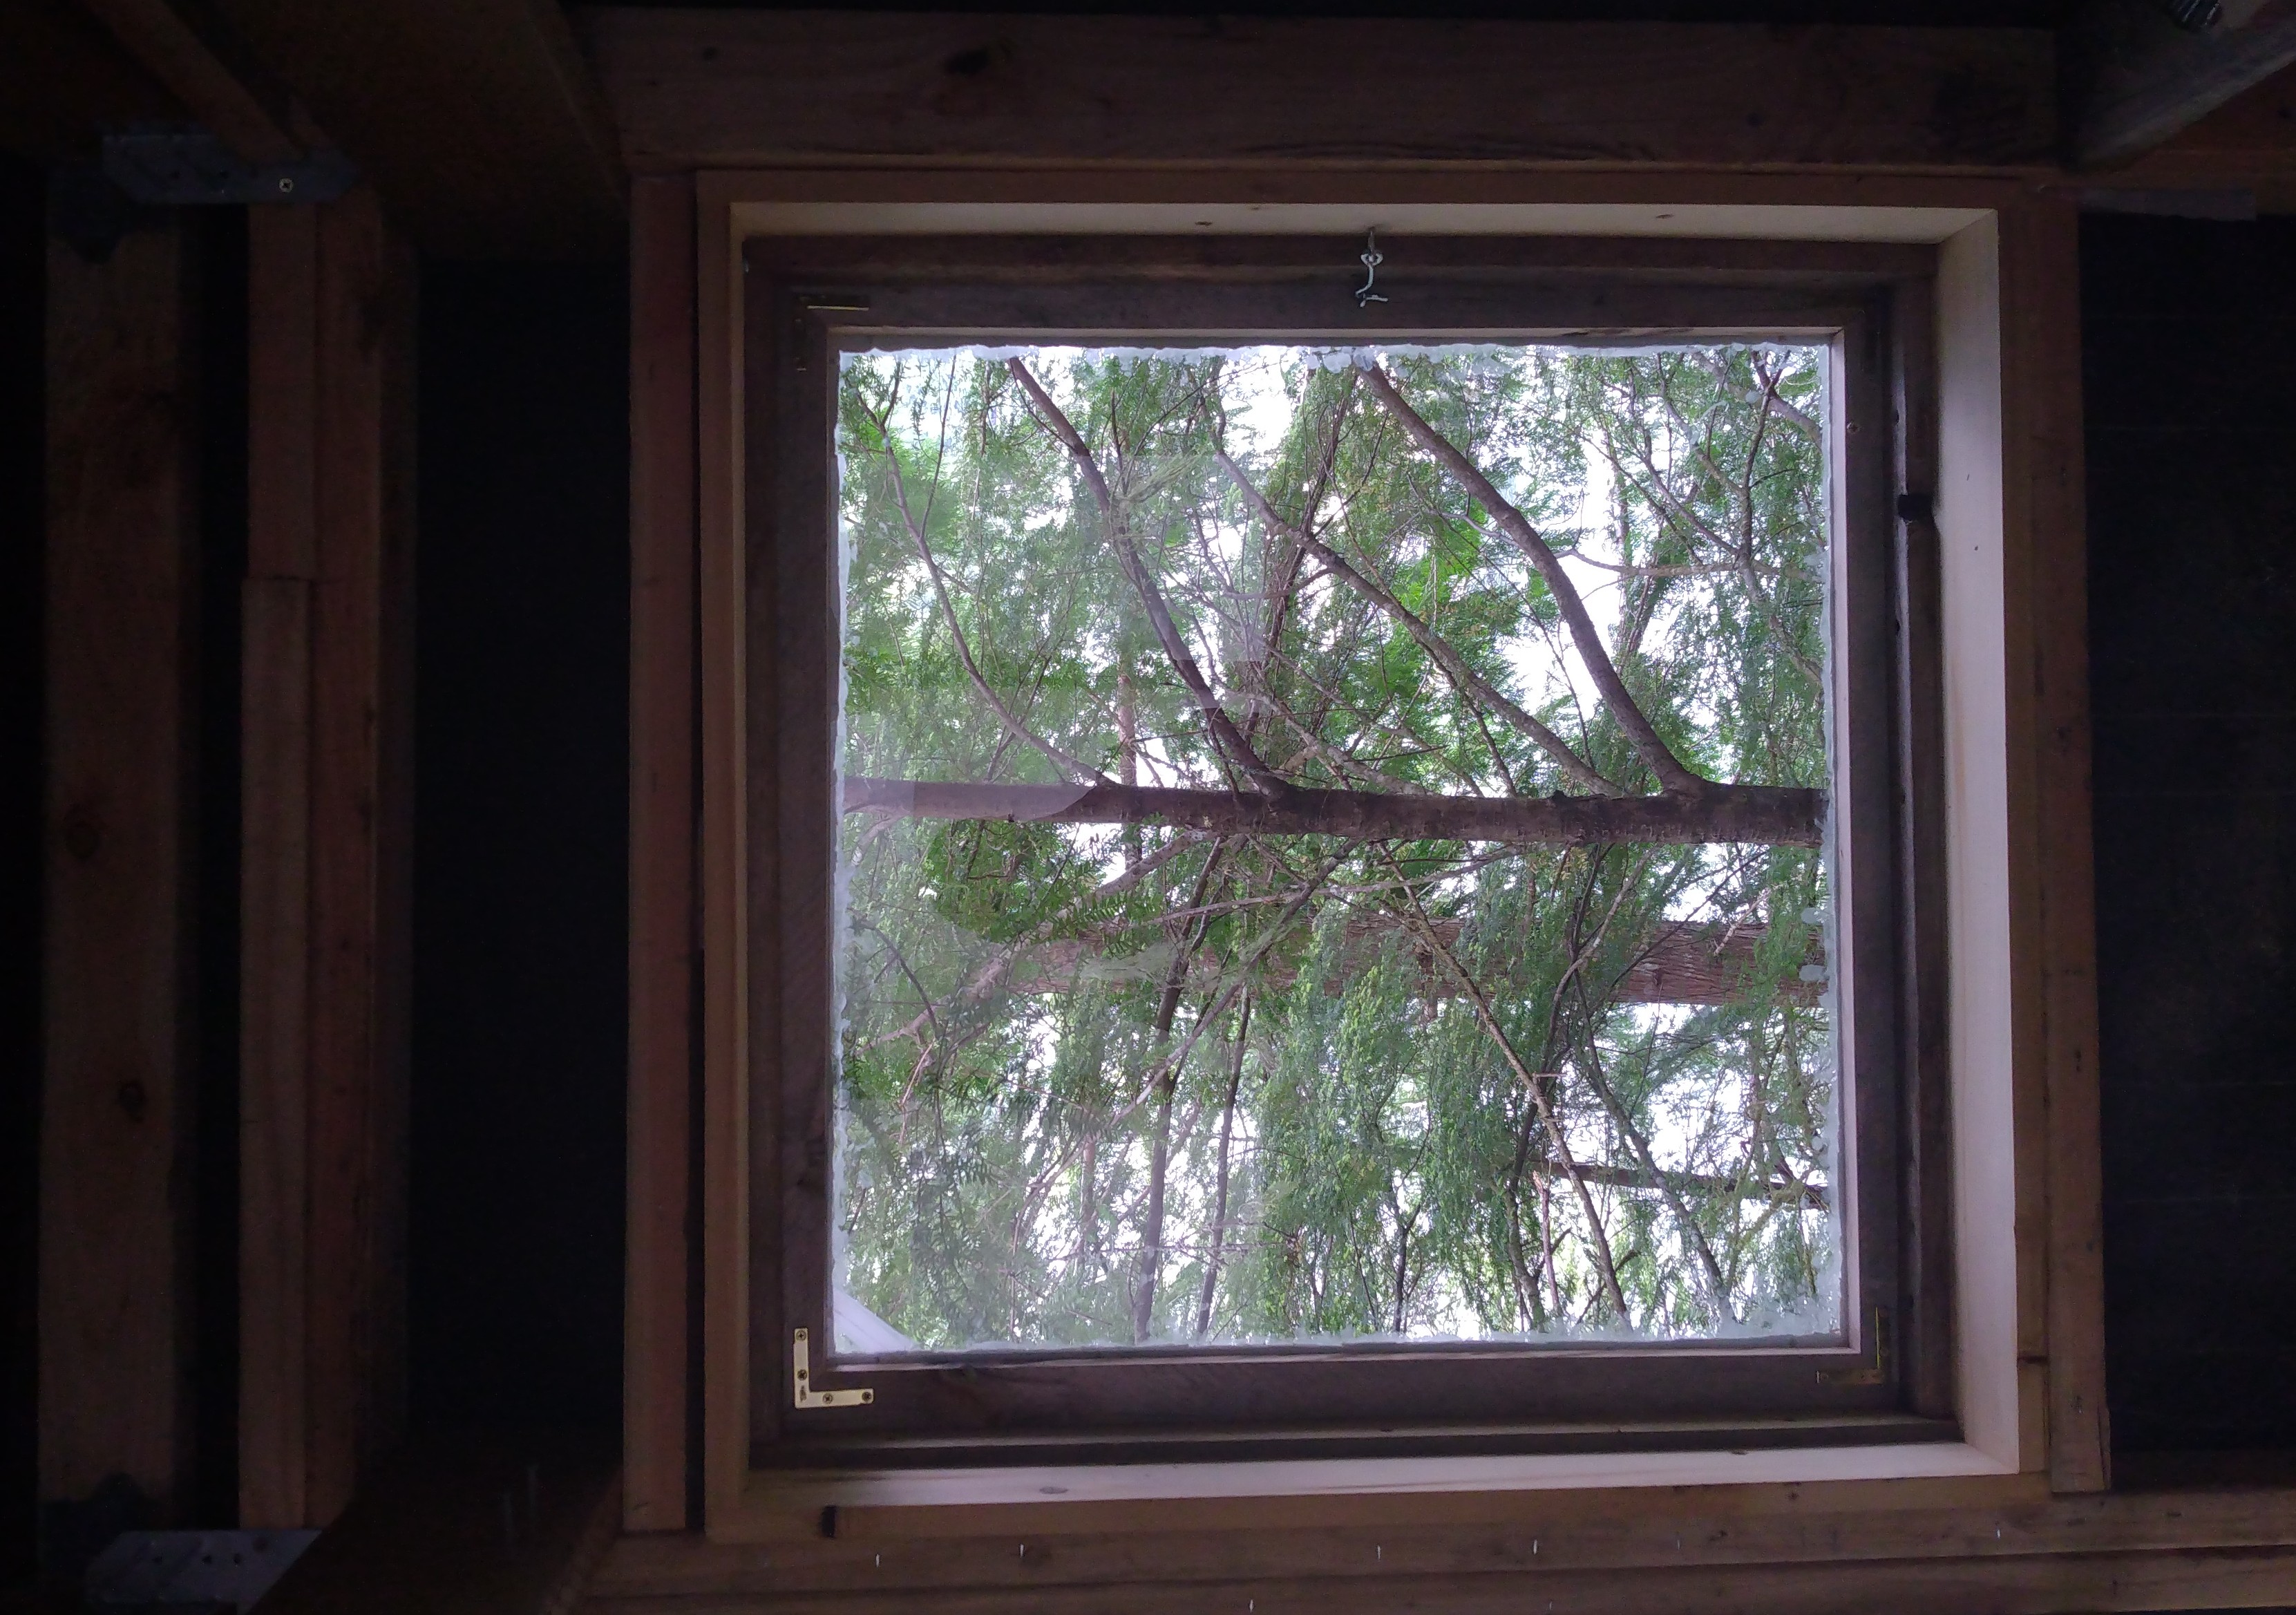 A square, clearly hand-crafted window with a single pane looking out at some thin tree-trunks